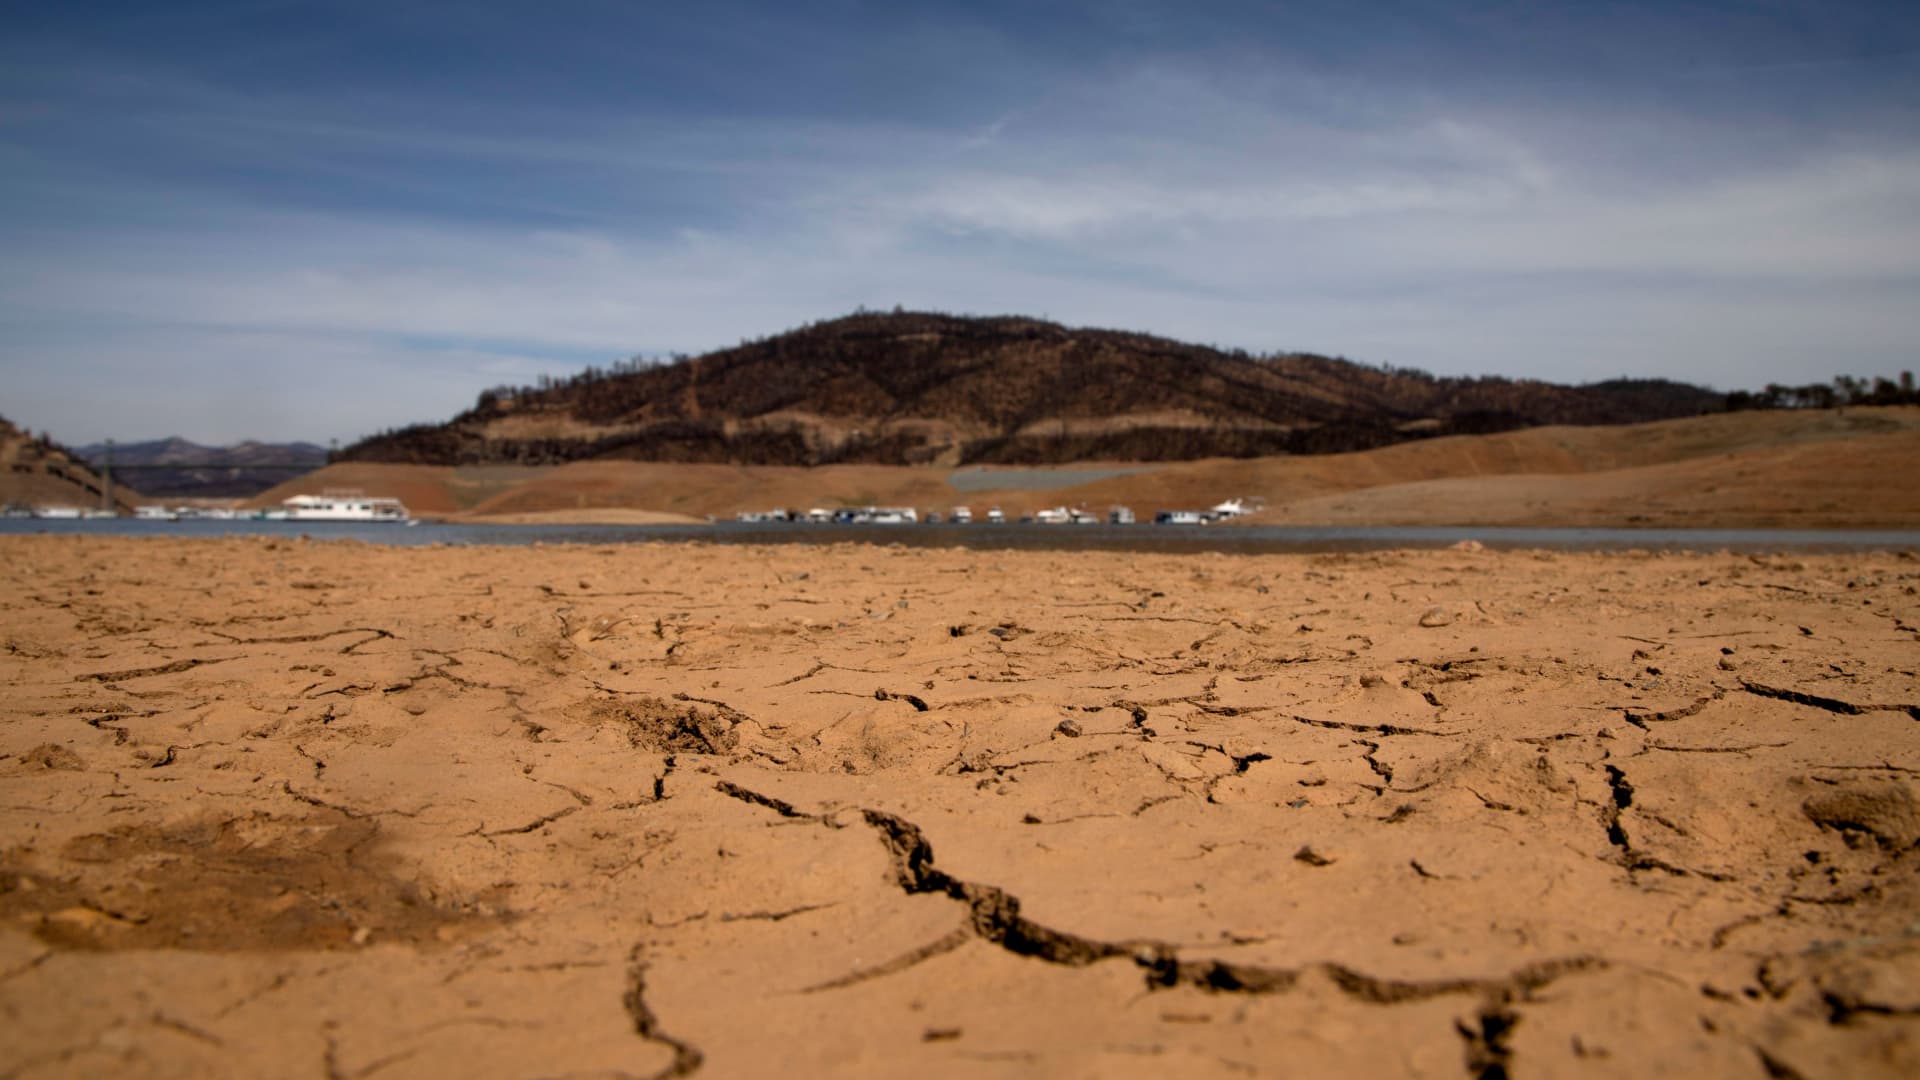 Dry land is visible, at a section that is normally under water, on the banks of Lake Oroville, which is the second largest reservoir in California and according to daily reports of the state's Department of Water Resources is near 35% capacity near Oroville, California, June 16, 2021.